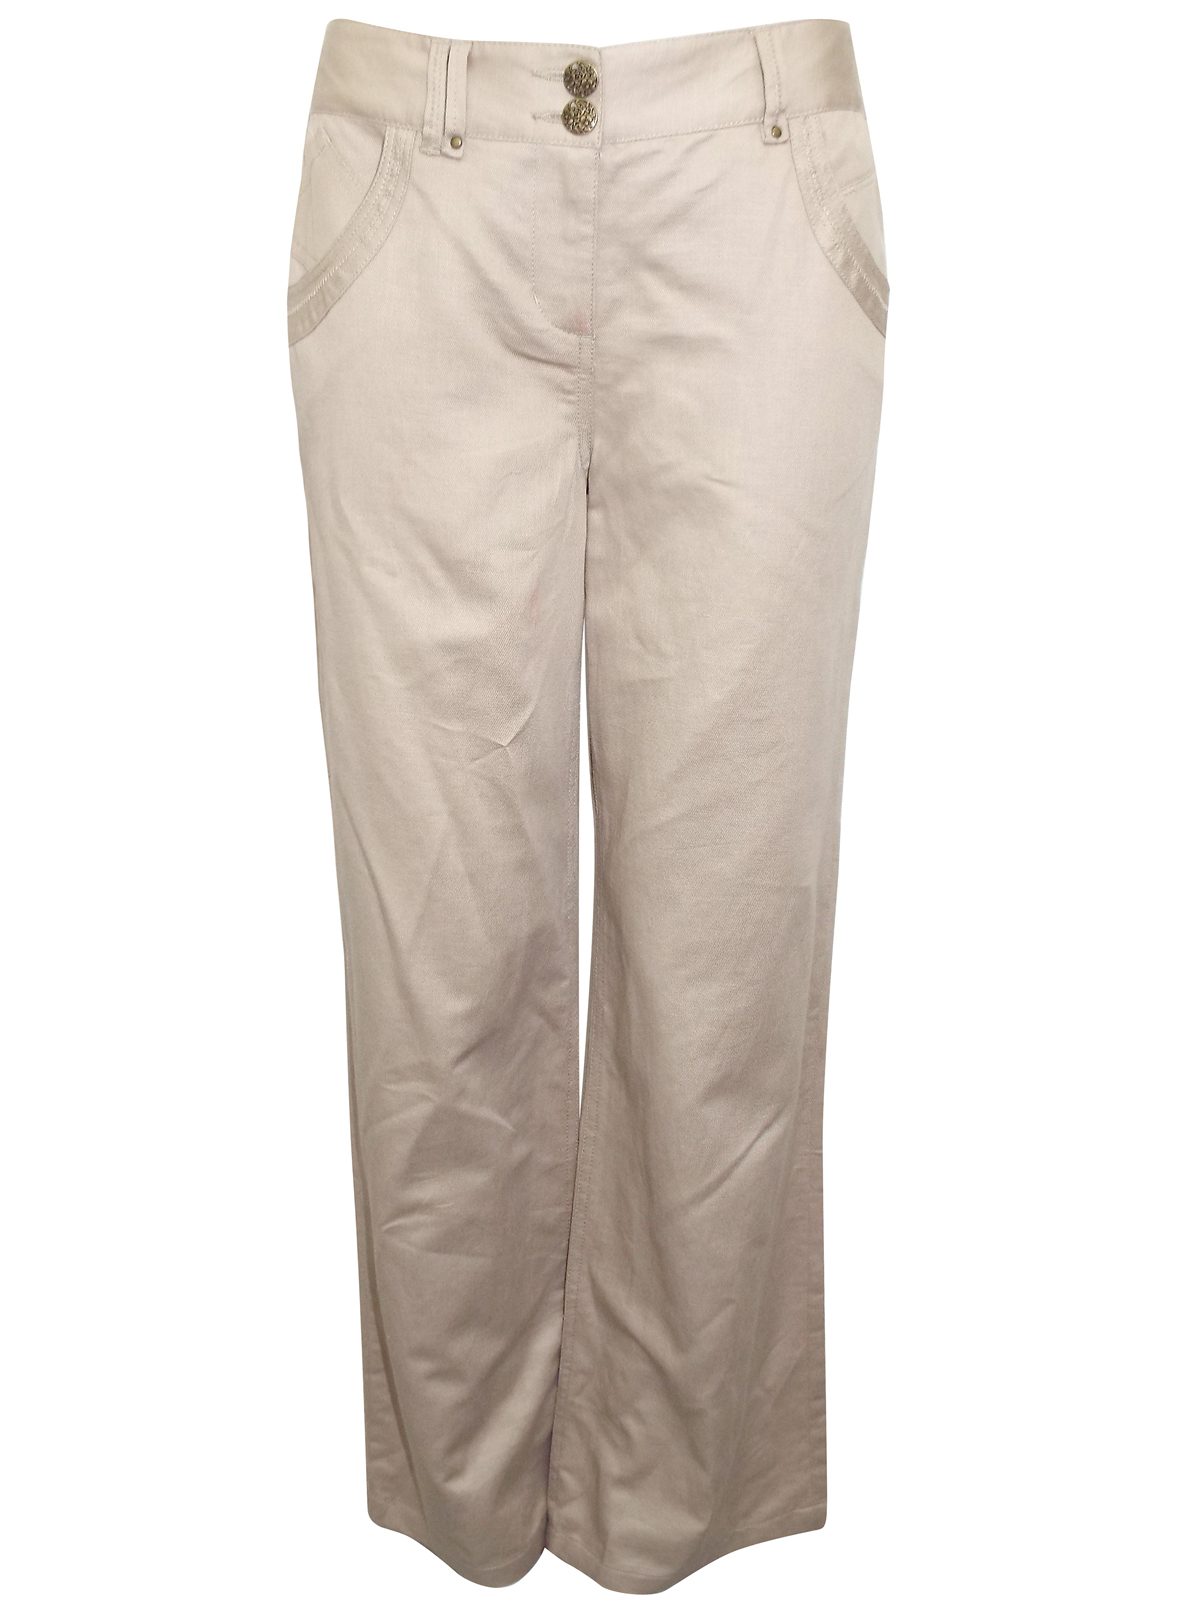 Marks and Spencer - - M&5 MINK Linen Blend Wide Leg Trousers - Size 10 ...